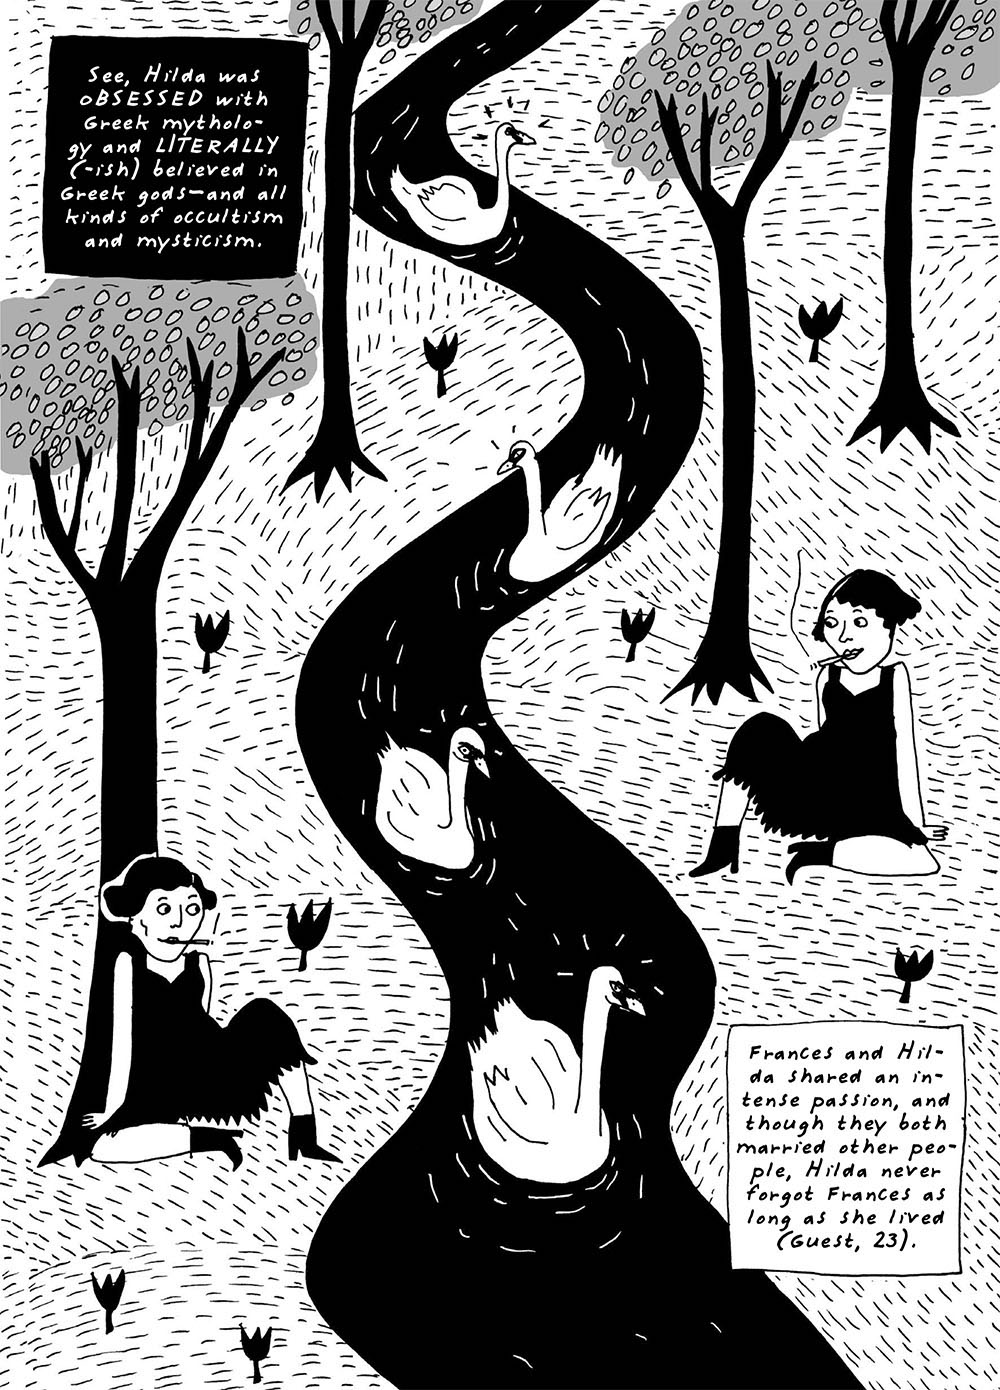 A full-page panel from "The Reddest Rose" depicting two women sitting on the bank of a river with swans reading "See, Hilda was OBSESSED with Greek mythology and LITERALLY (-ish) believed in Greek gods—and all kinds of occultism and mysticism." / "Frances and Hilda shared an intense passion, and though they both married other people, Hilda never forgot Frances as long as she lived (Guest, 23)."